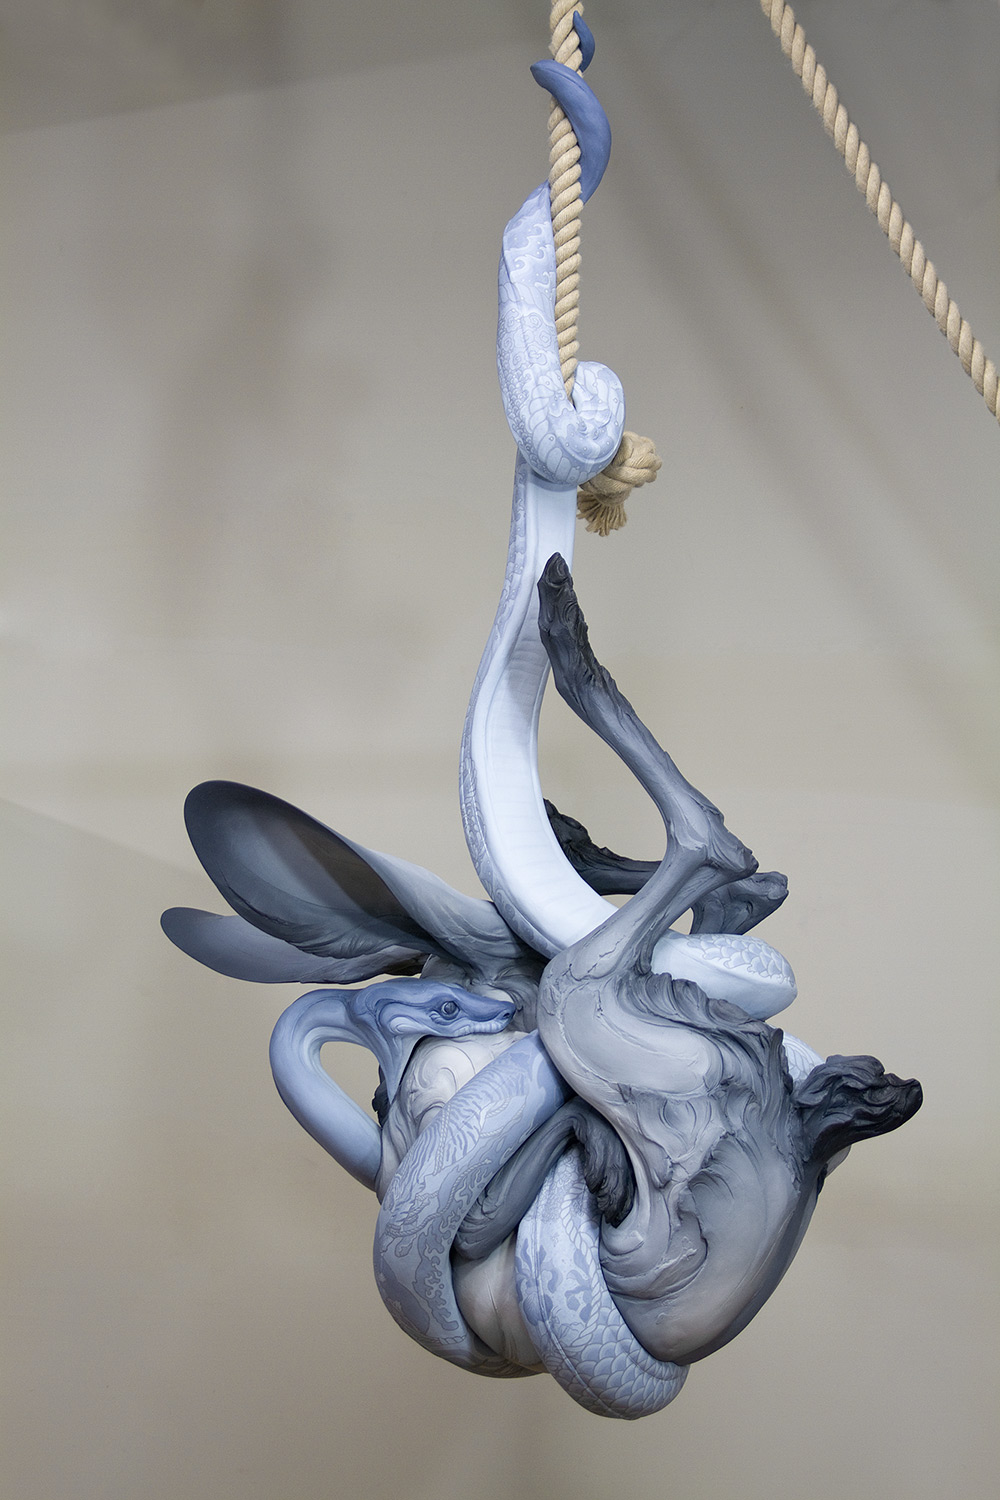 Fascinating Human Emotions Themed Animal Sculptures By Beth Cavener 13